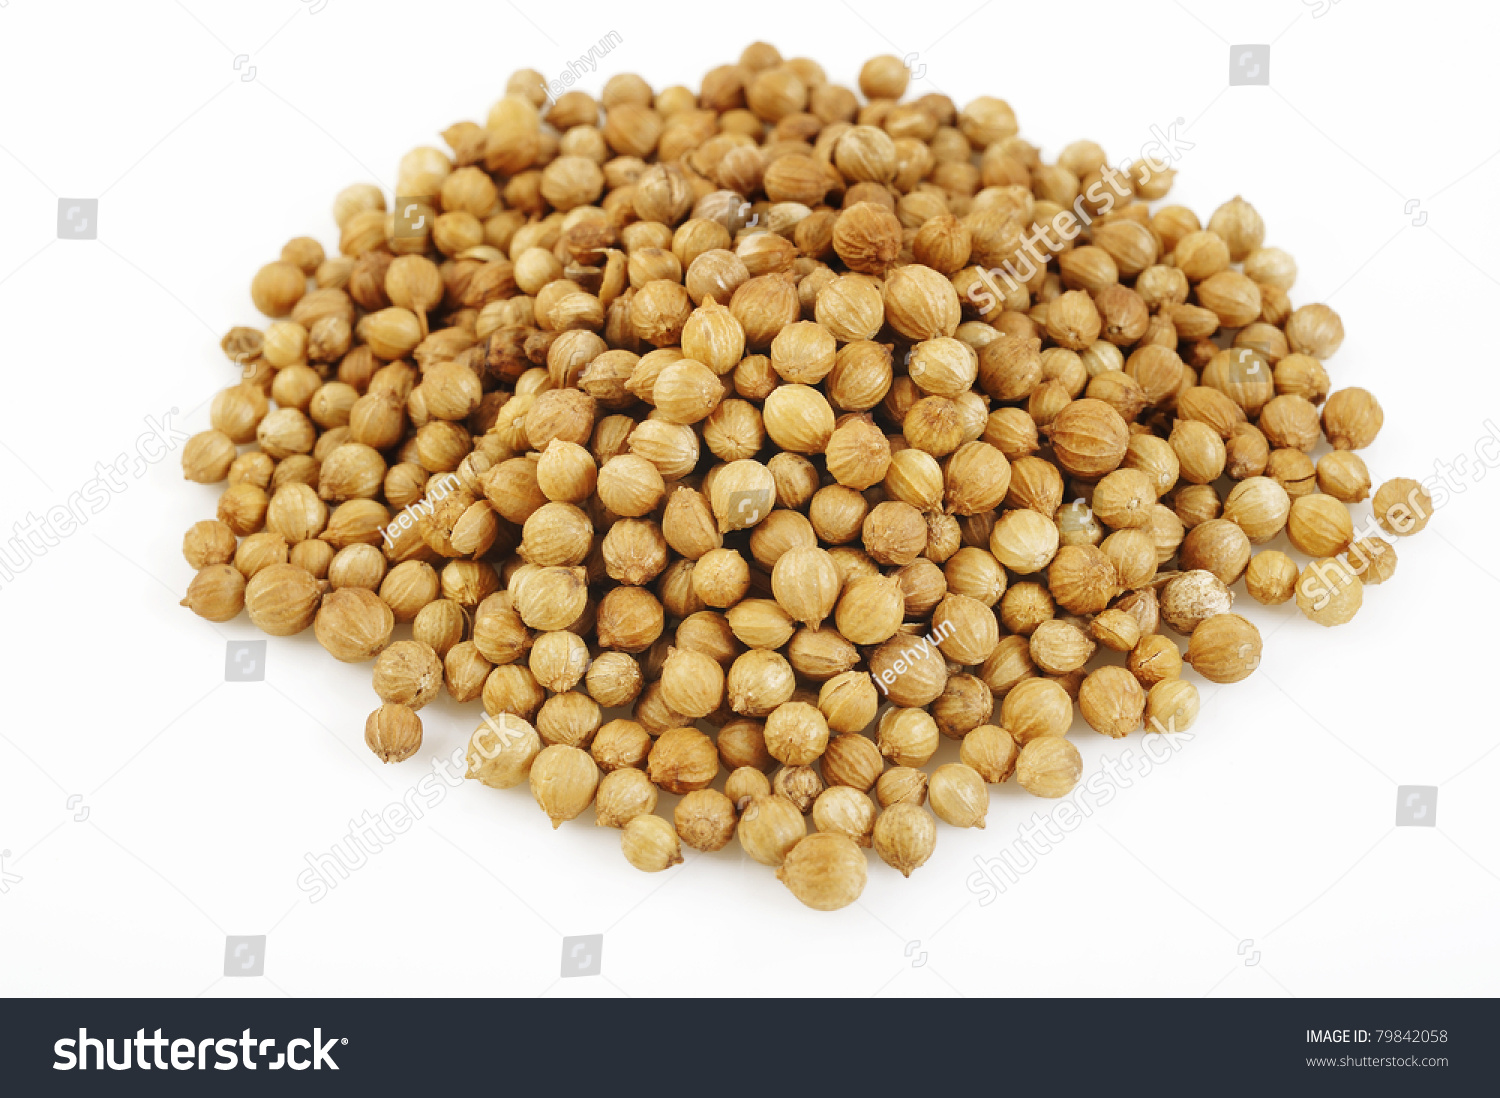 Image result for white coriander seed